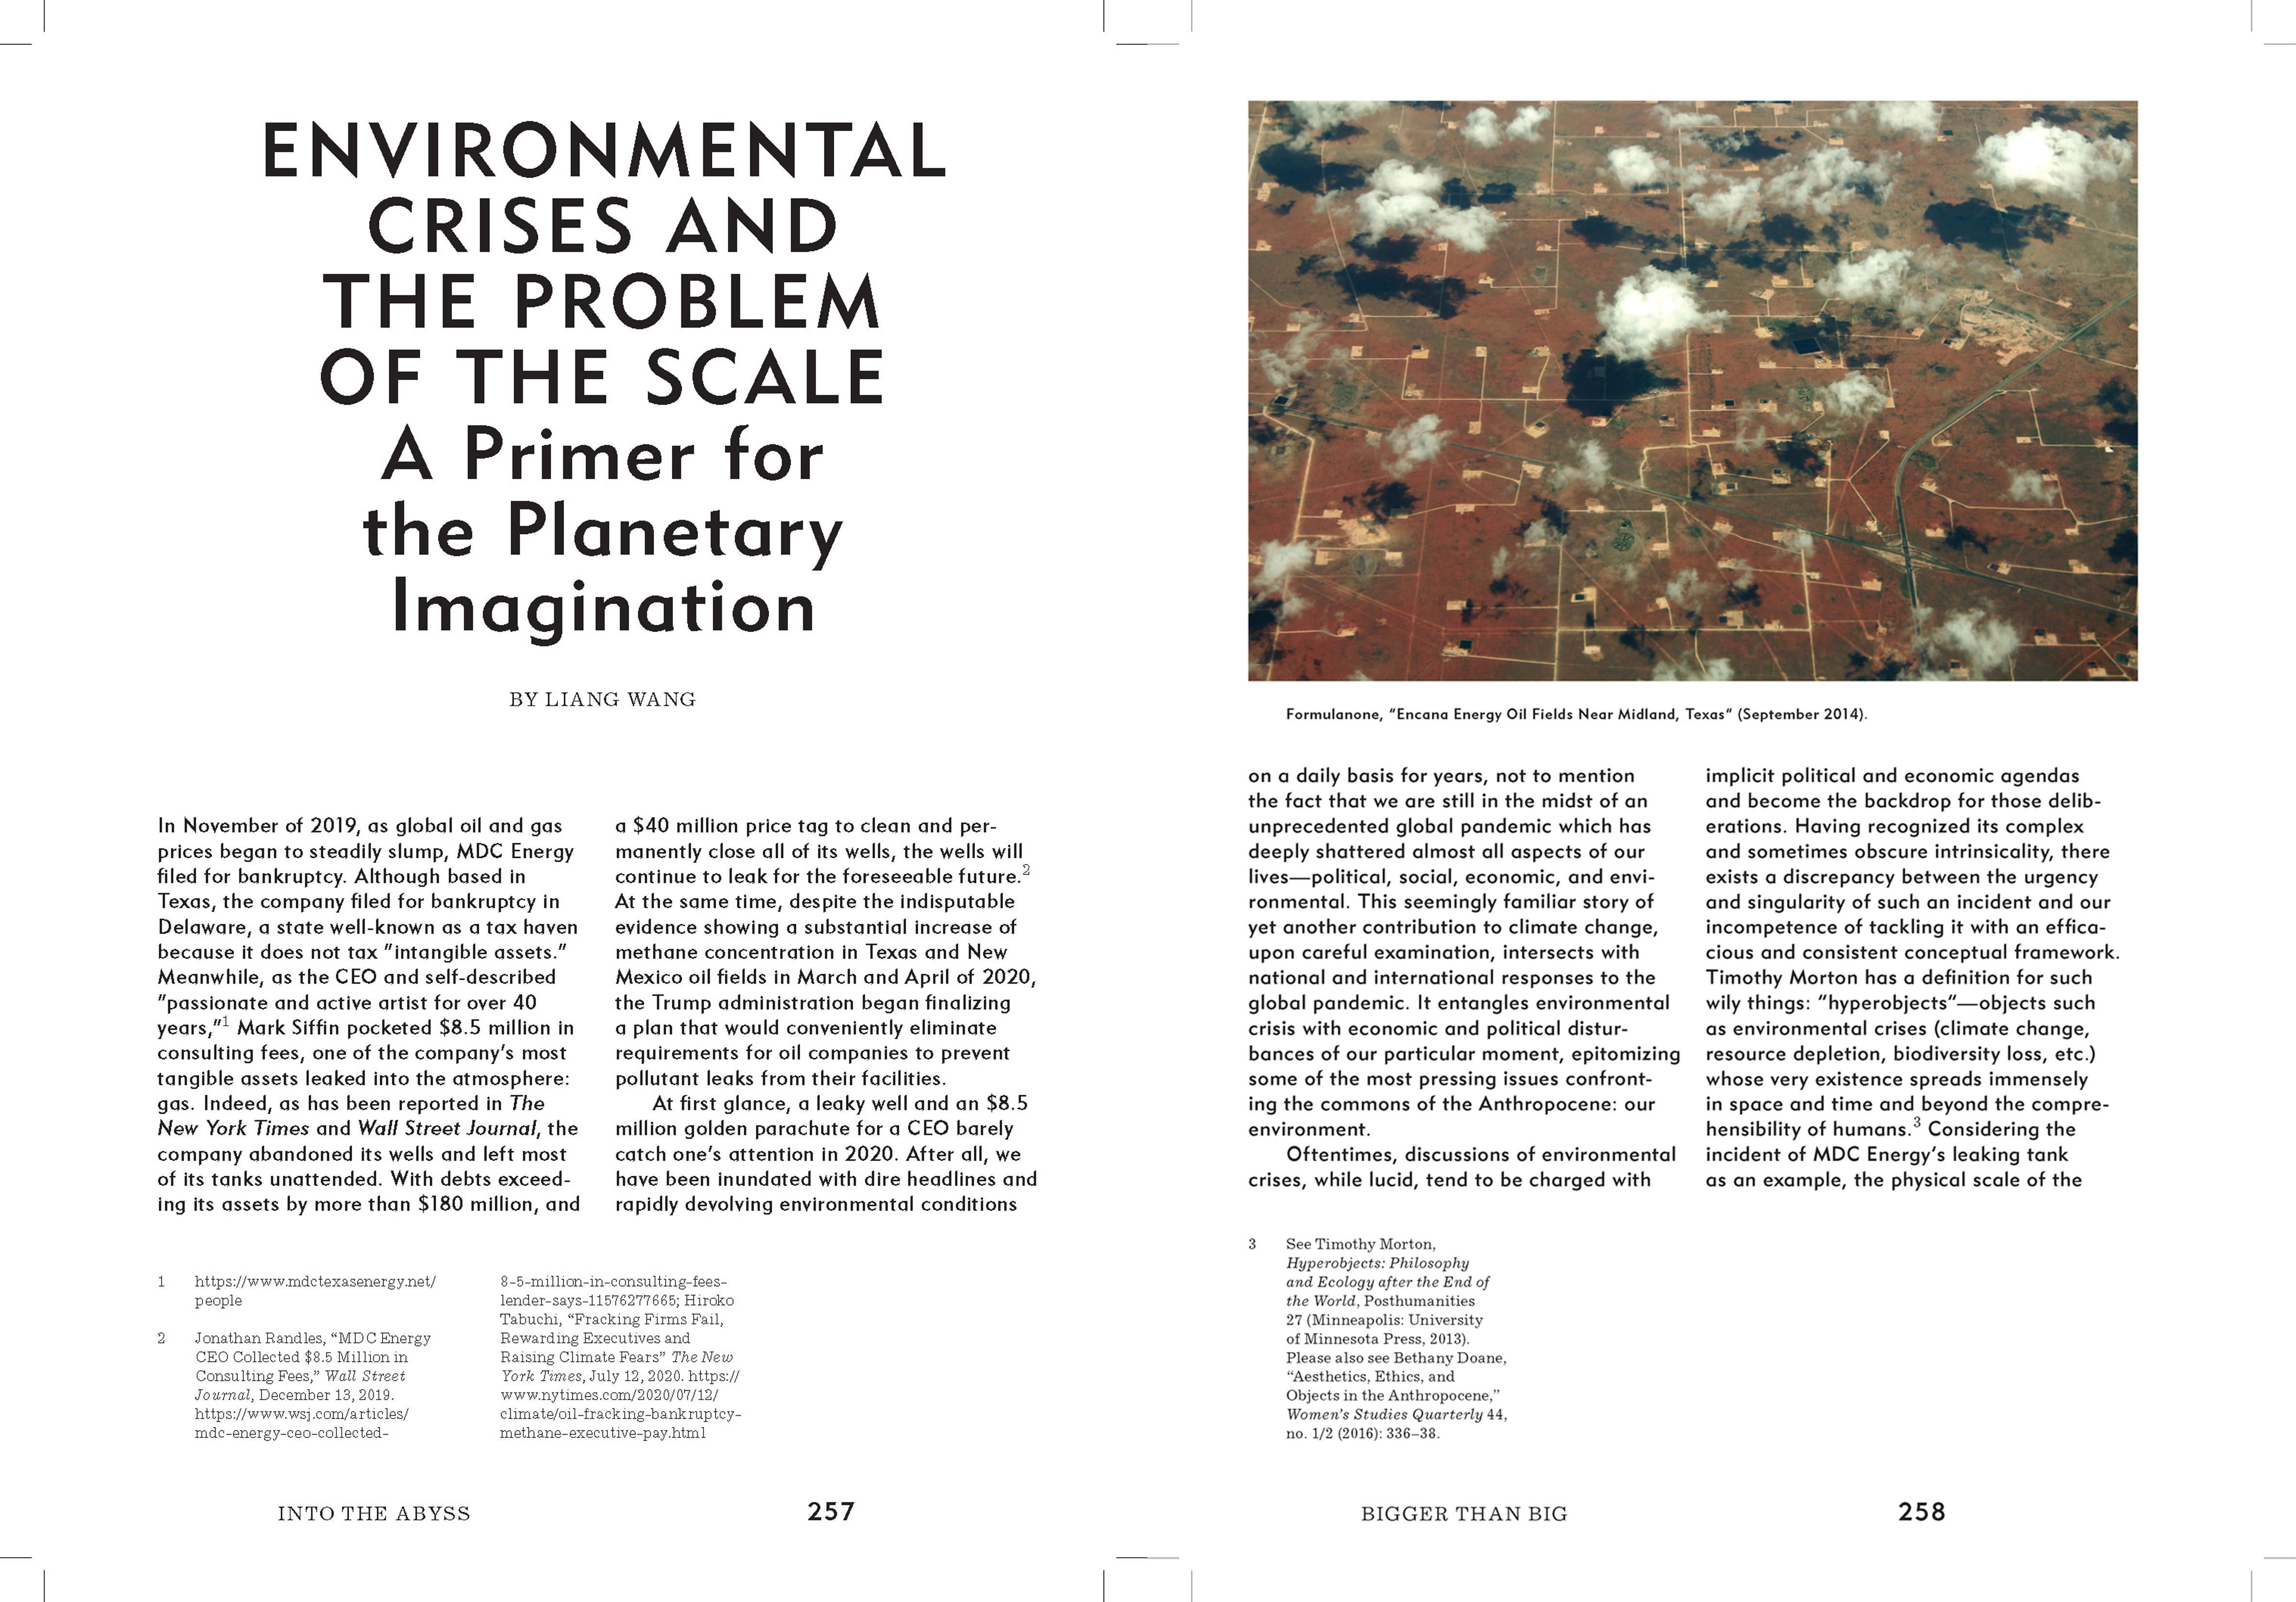 Liang Wang. “Environmental Crises and the Problem of the Scale A Primer for the Planetary Imagination” in Anthony Acciavatti, Dan Handel, and Enrique Ramirez. ed. Manifest #3 Bigger than Big. 2021